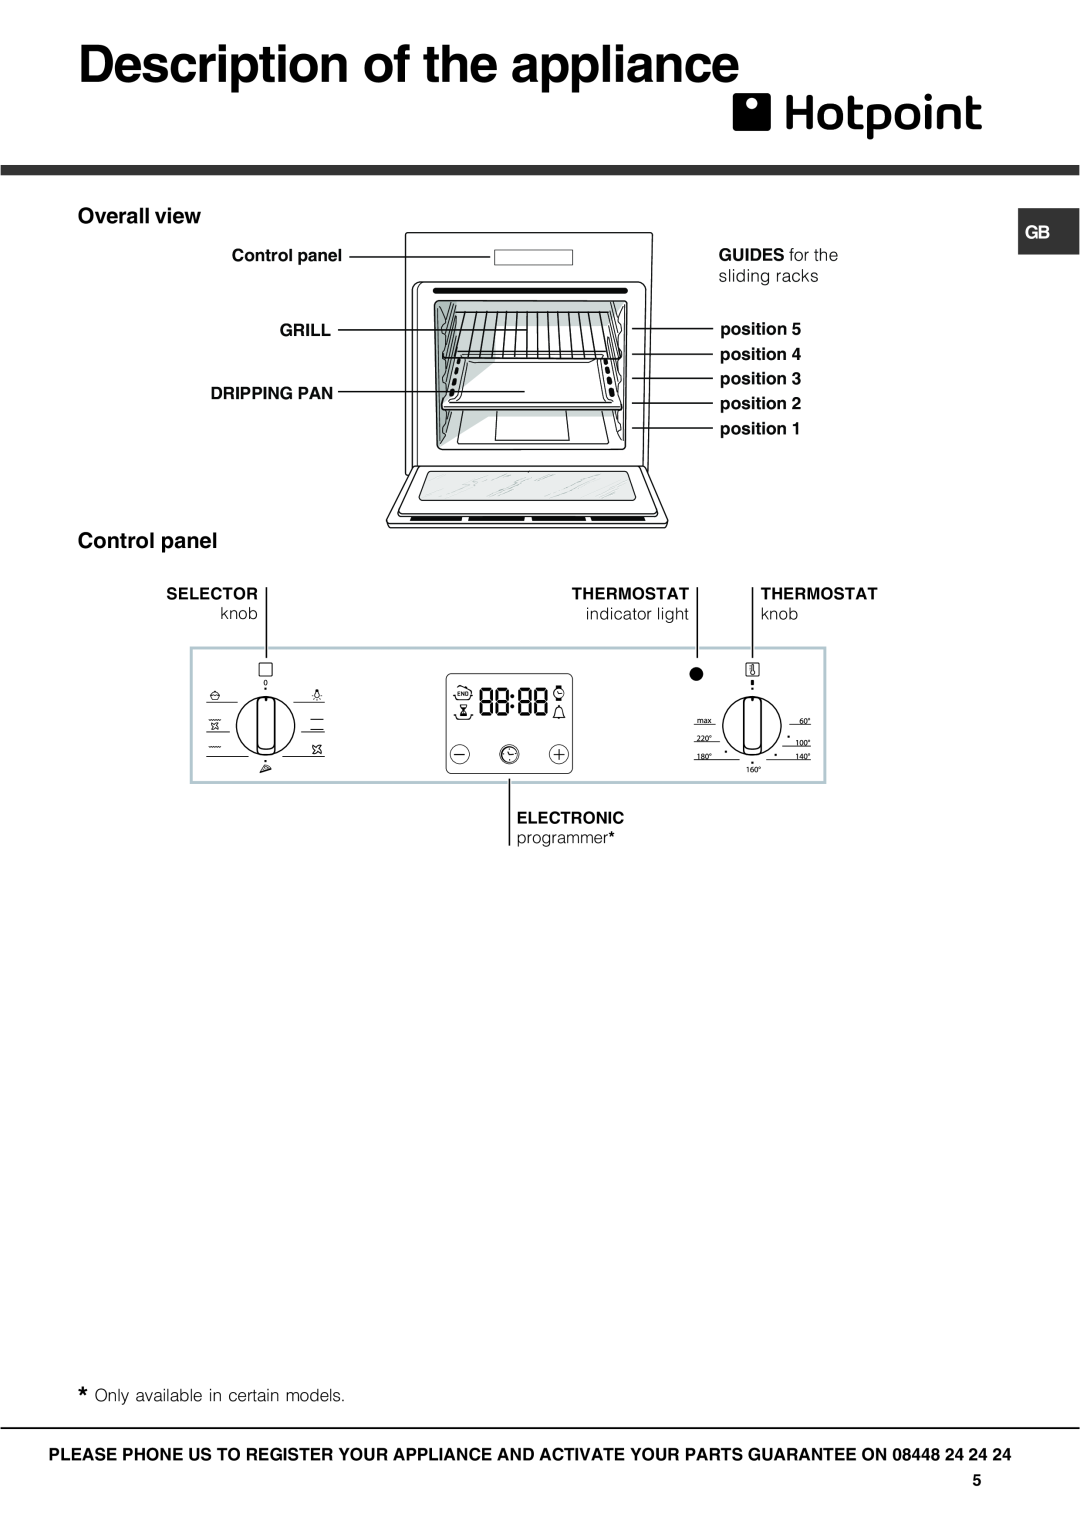 Hotpoint SX manual Description of the appliance, Control panel GRILL DRIPPING PAN, Selector, Thermostat, Electronic 